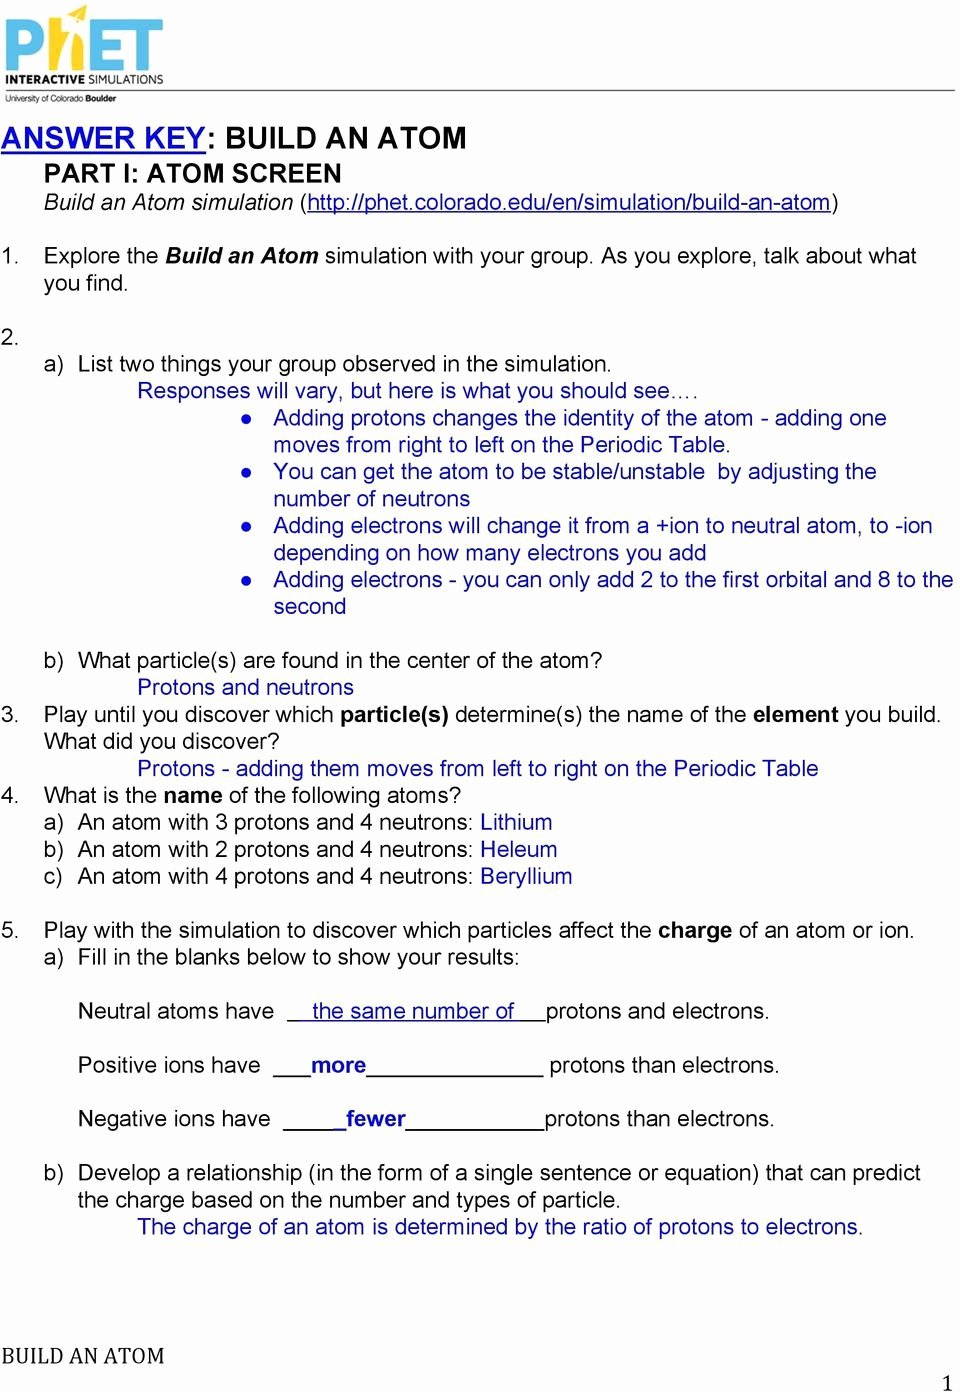 Atoms and isotopes Worksheet Answers Unique Phet isotopes and atomic Mass Worksheet Answers